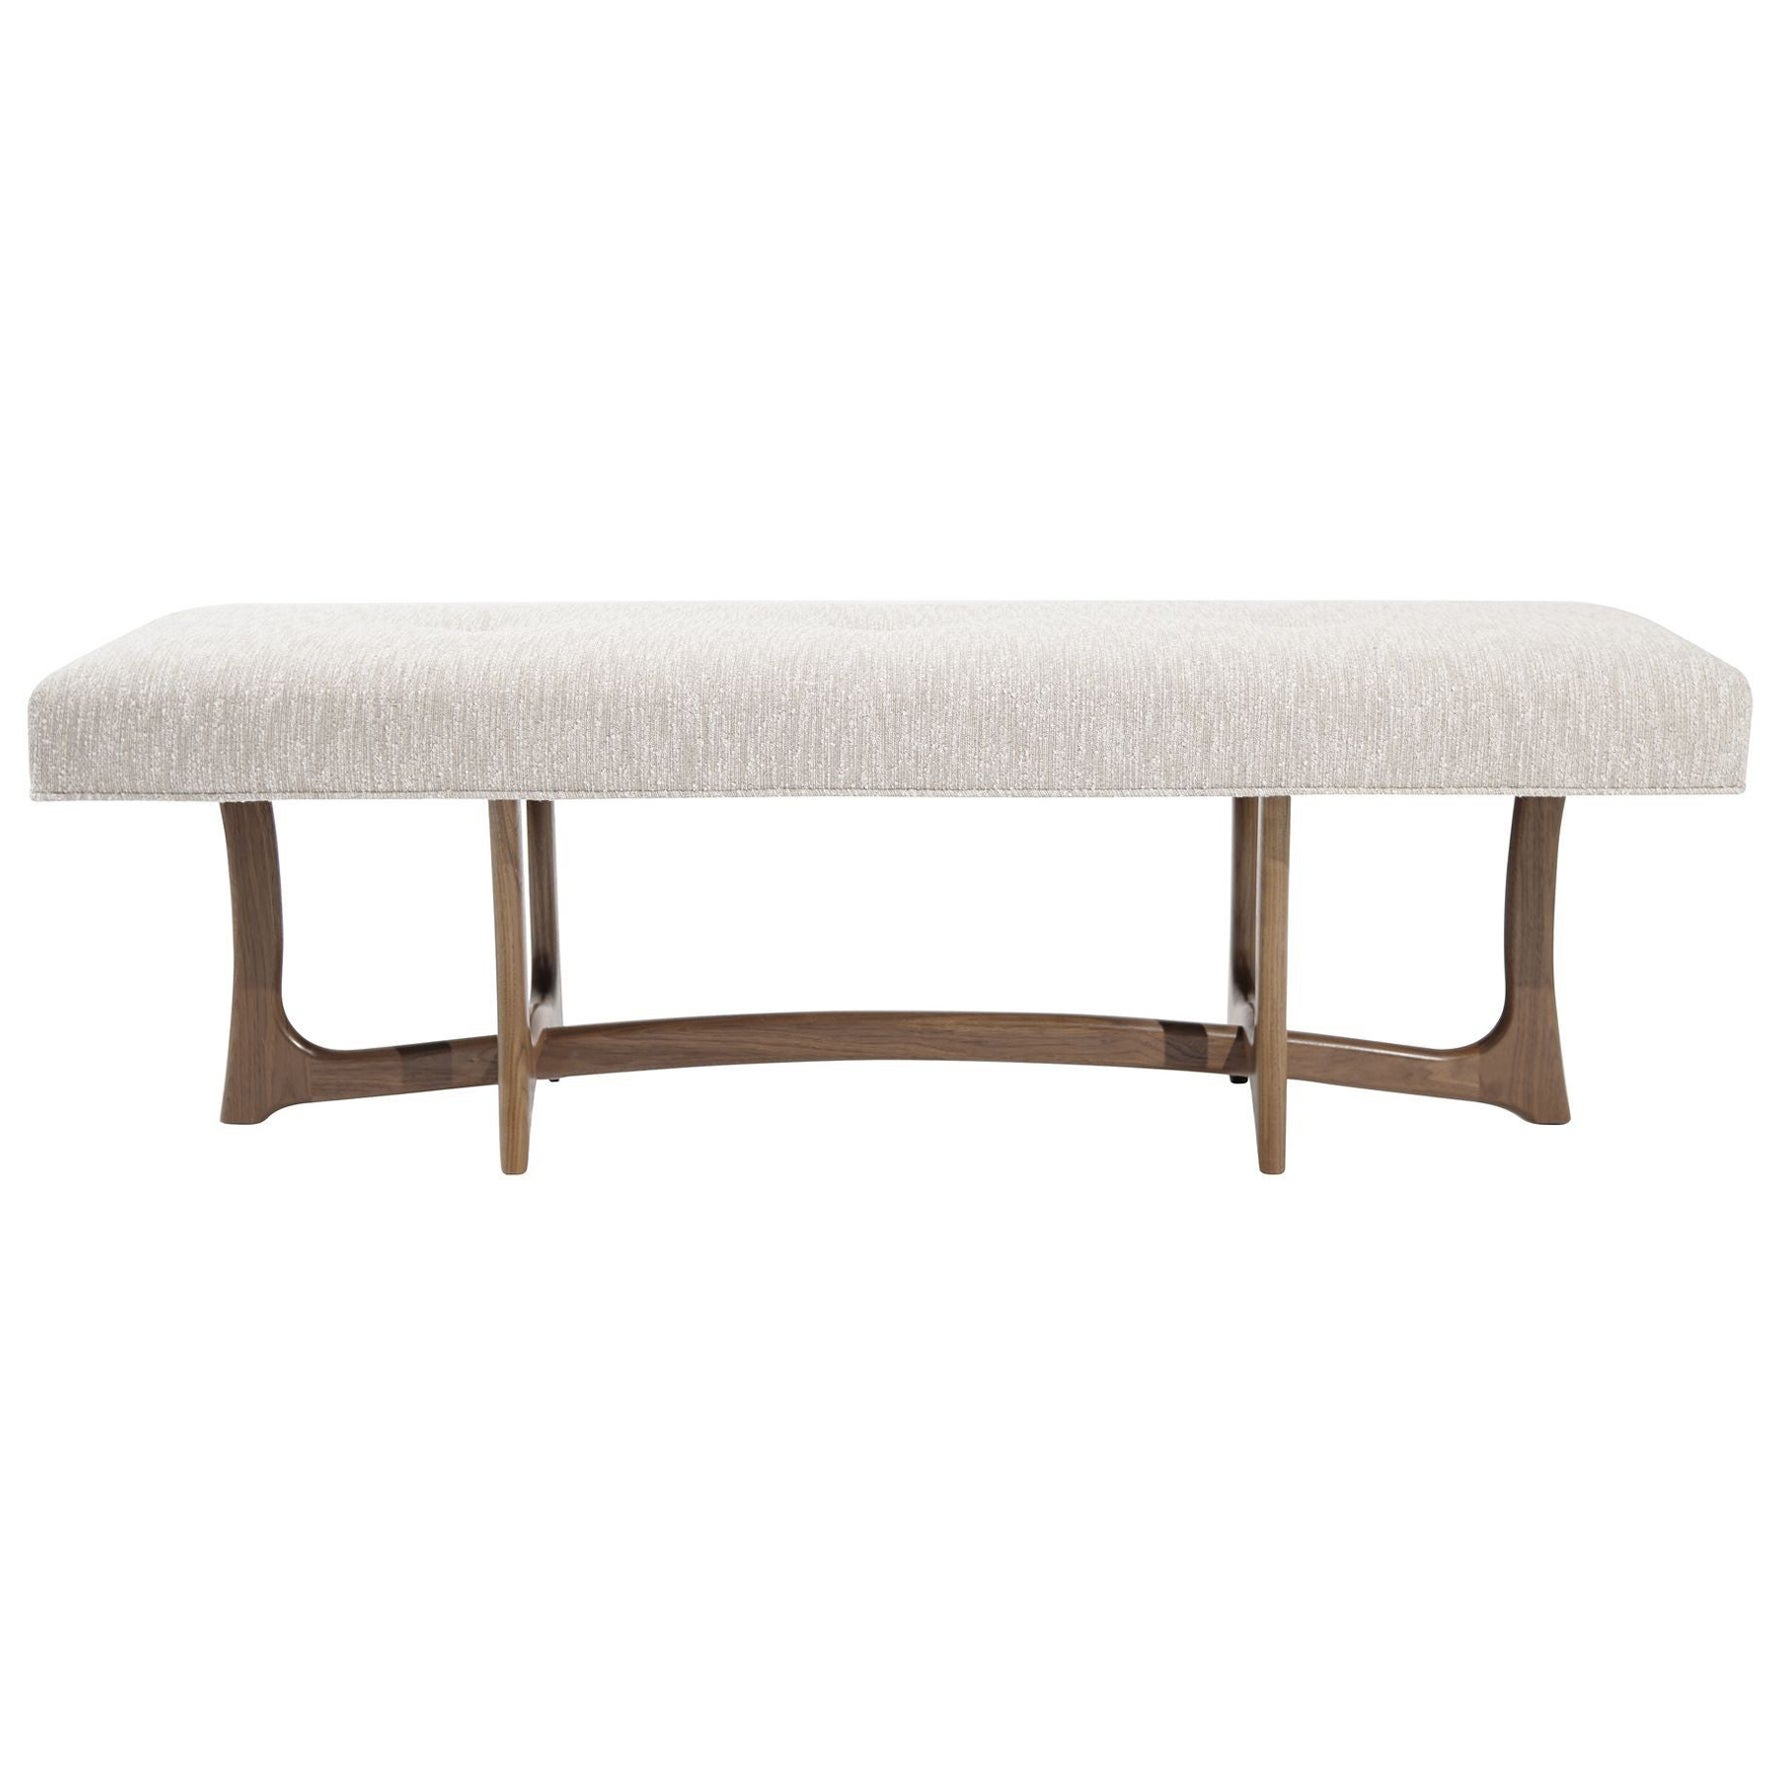 The Forma Bench in Natural Walnut by Stamford Modern